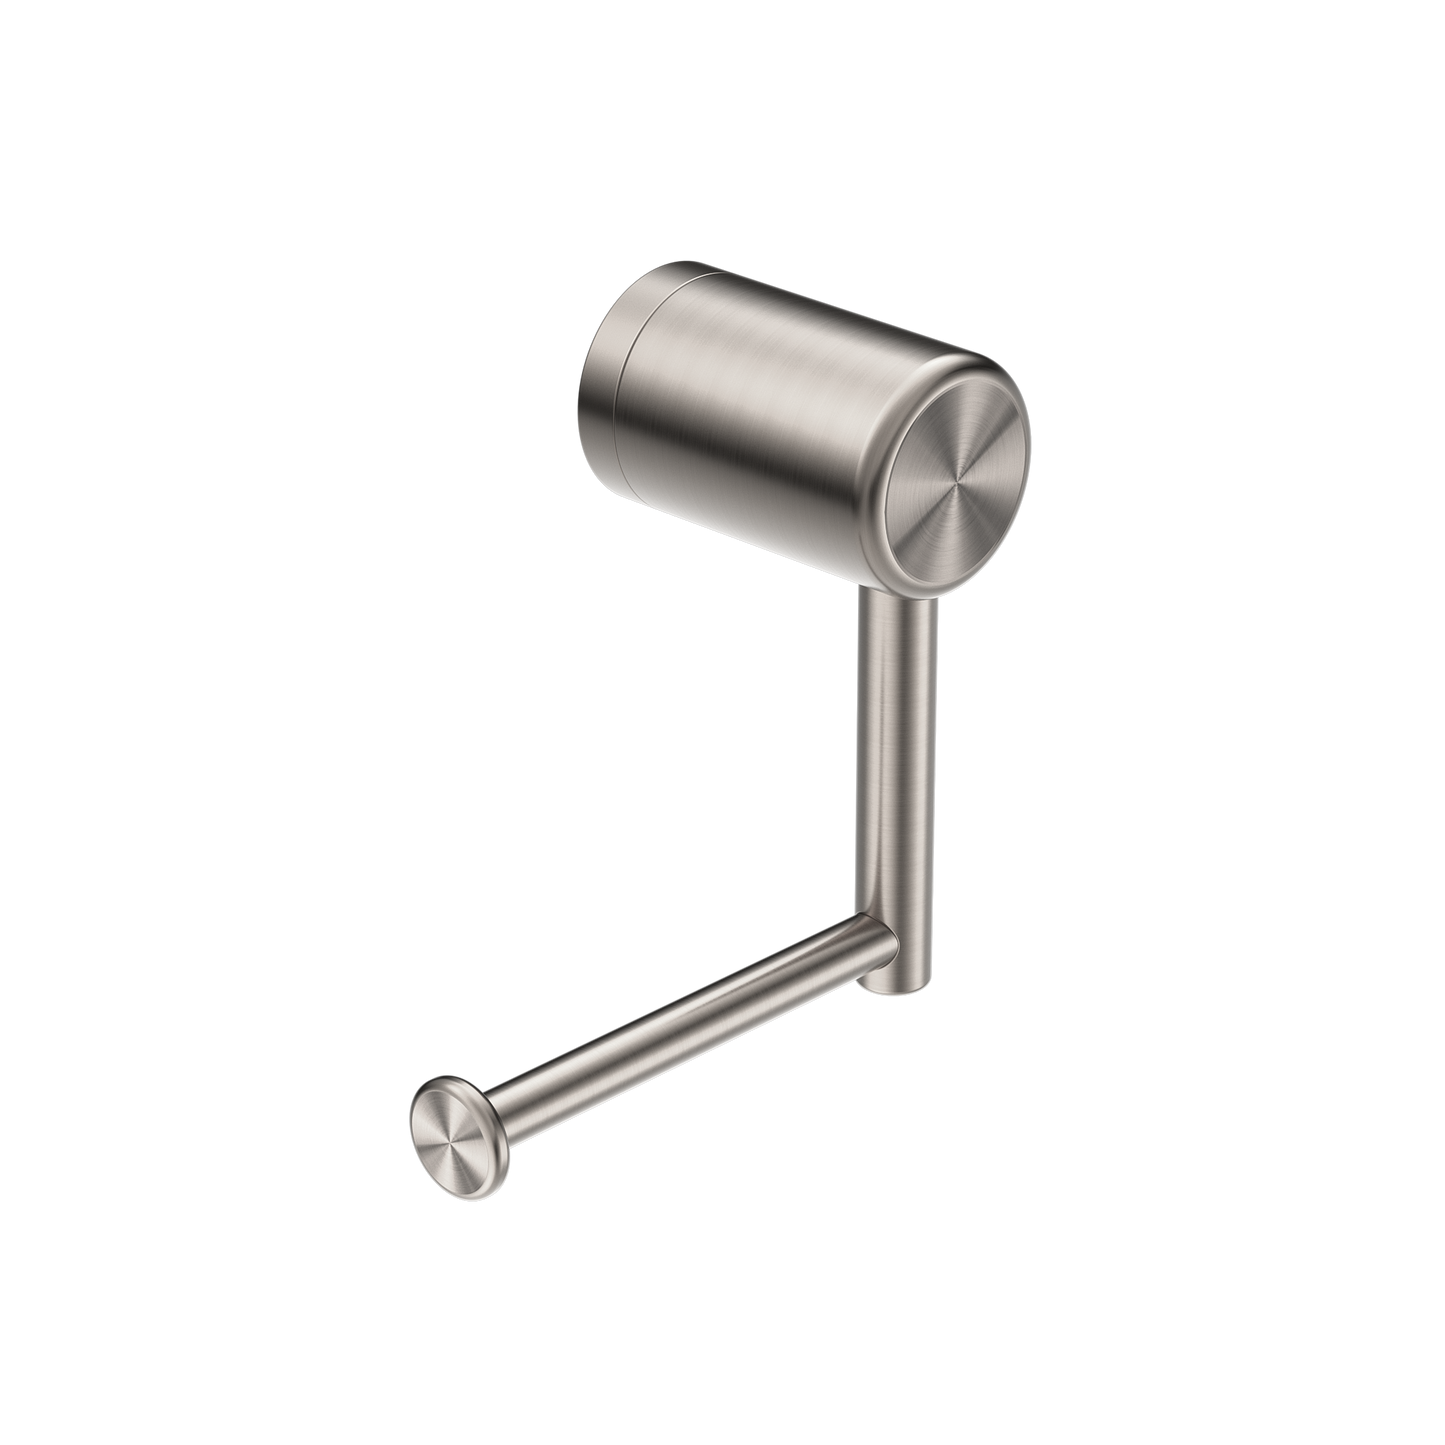 CALIBRE MECCA HEAVY DUTY TOILET ROLL HOLDER BRUSHED NICKEL